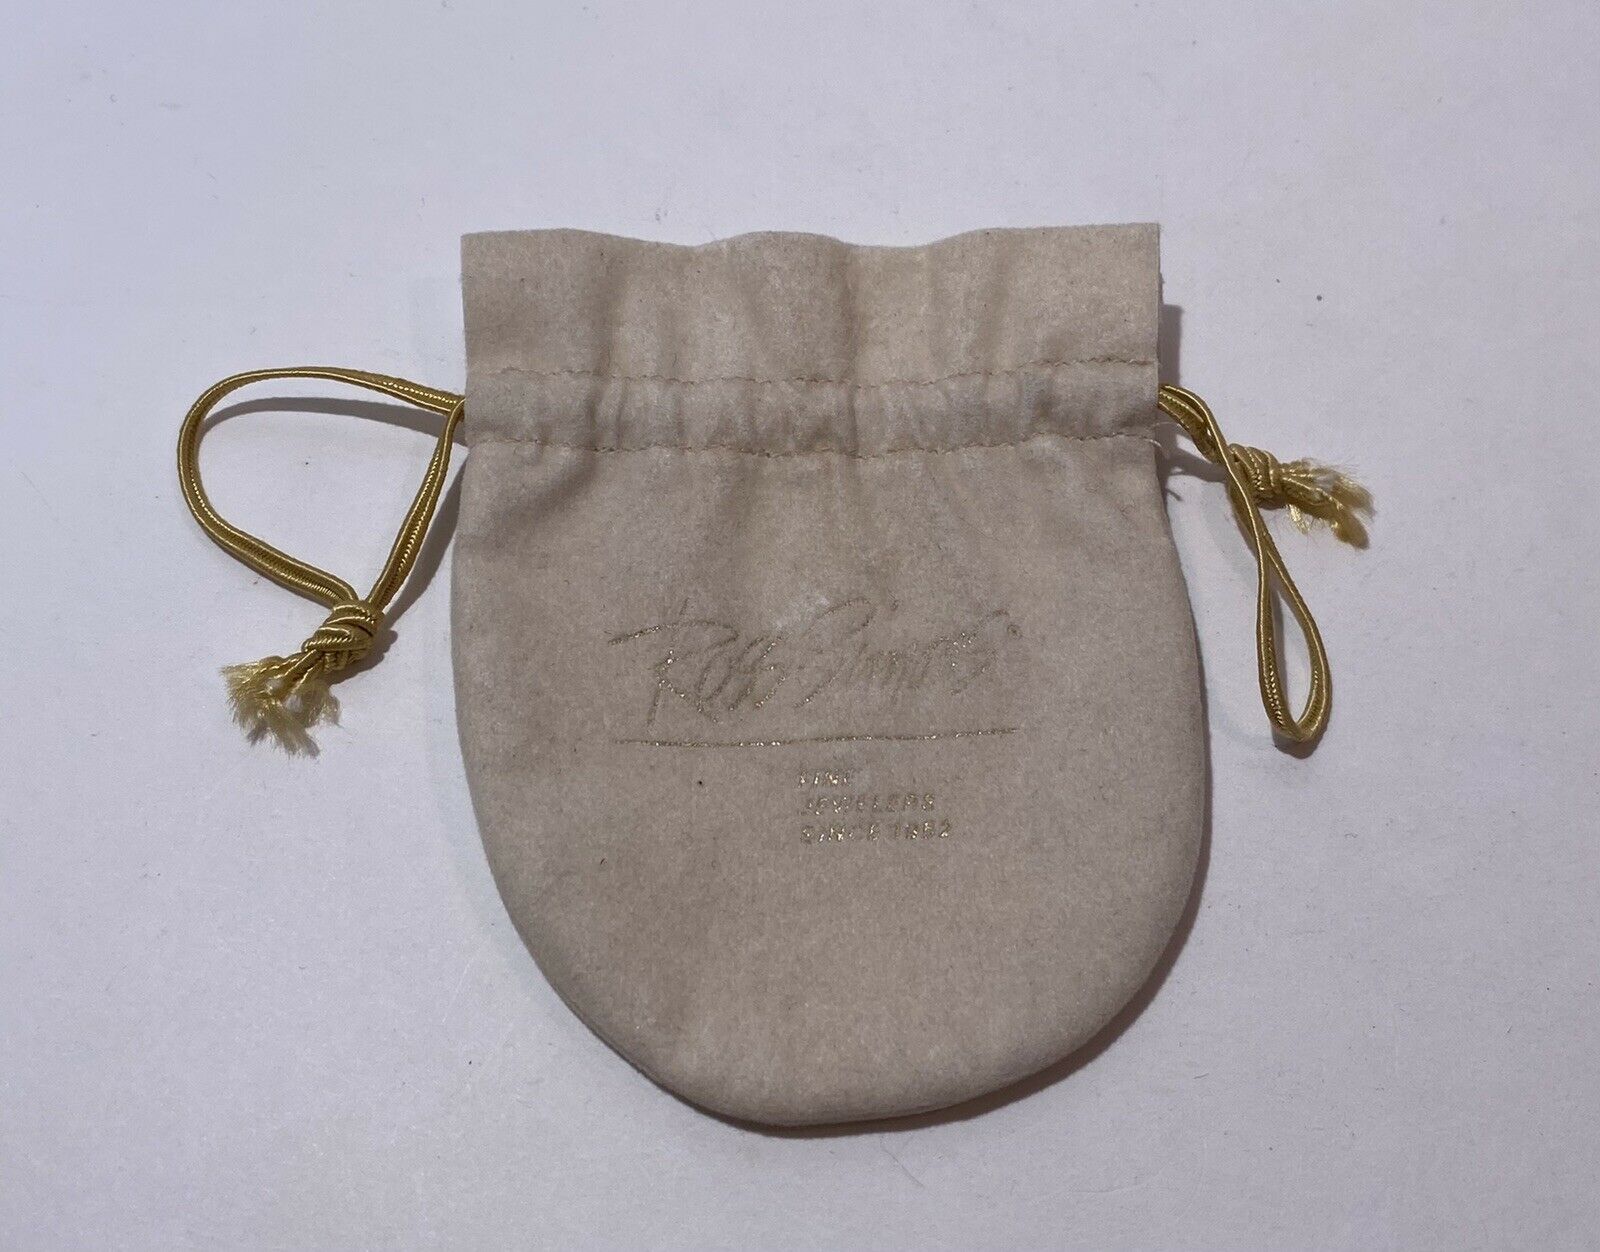 Vintage Ross Simons Jewelry Dust Pouch Holder Bag